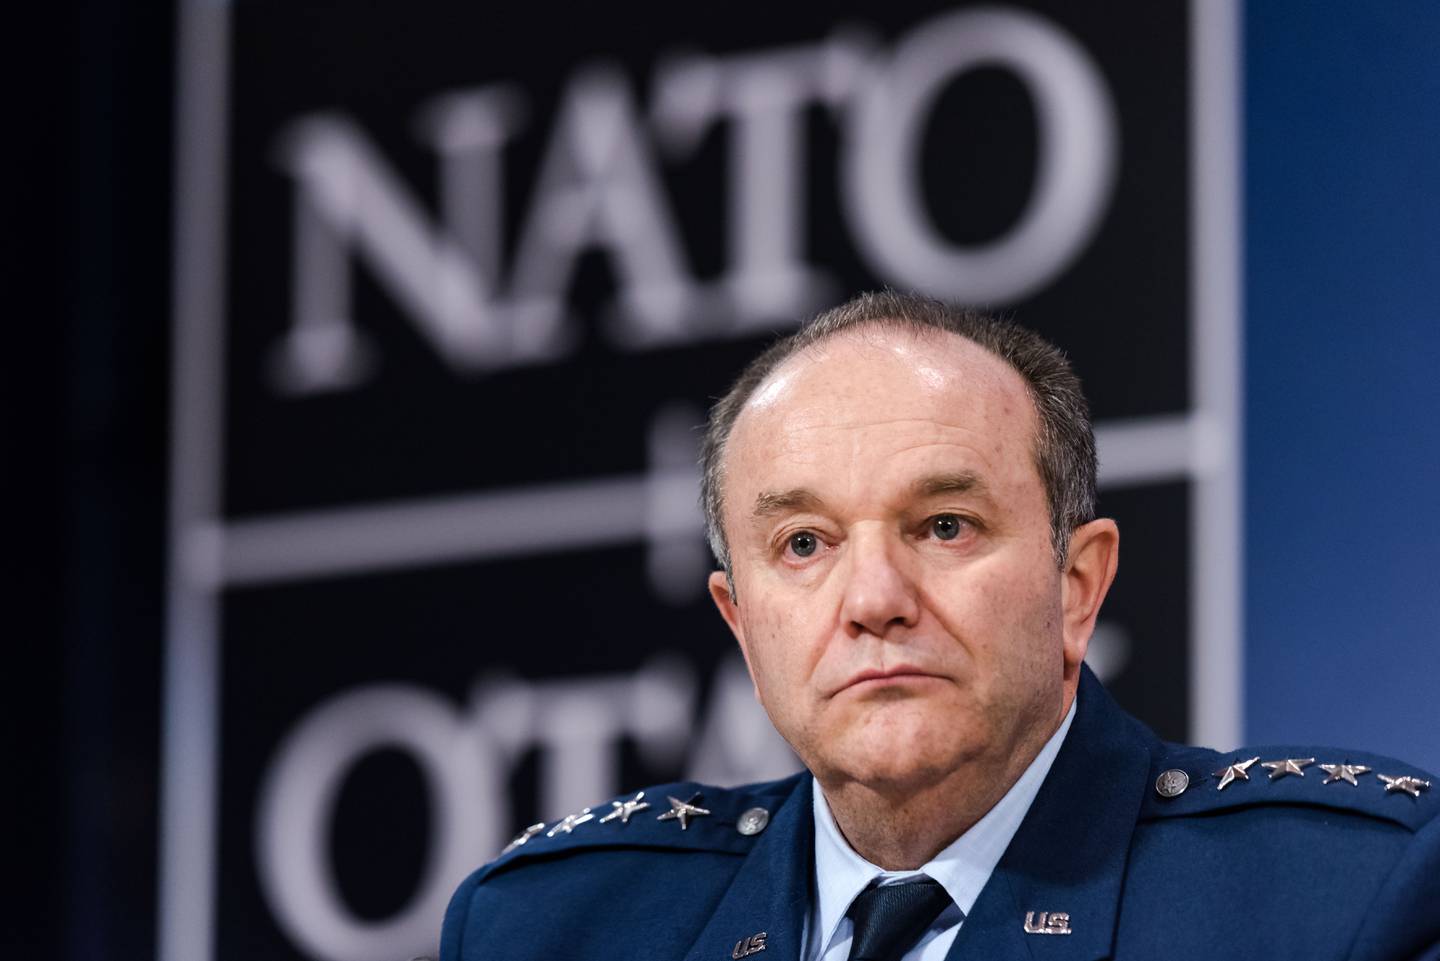 Supreme Allied Commander Europe (SACEUR) General Philip M. Breedlove attends a media conference at NATO headquarters in Brussels on Thursday, Jan. 22, 2015. (AP Photo/Geert Vanden Wijngaert)